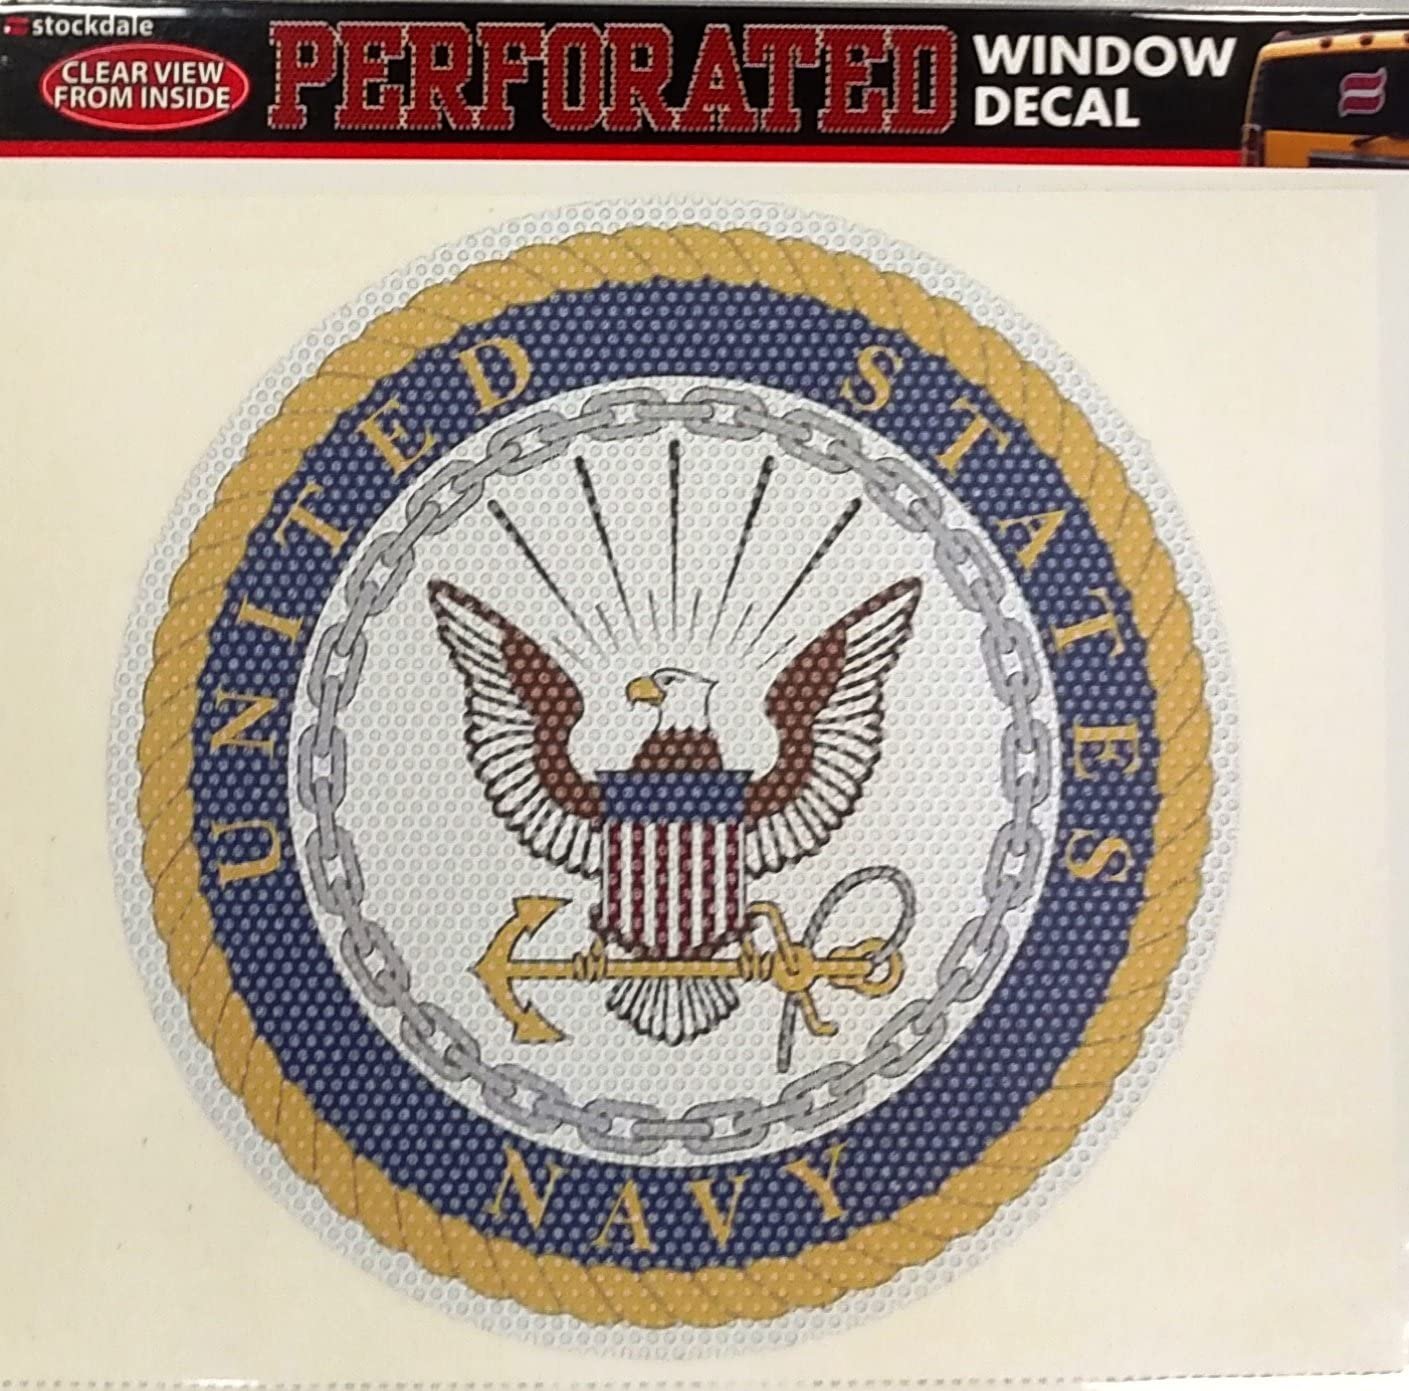 United States Navy Military 8 Inch Preforated Window Film Decal Sticker, One-Way Vision, Adhesive Backing